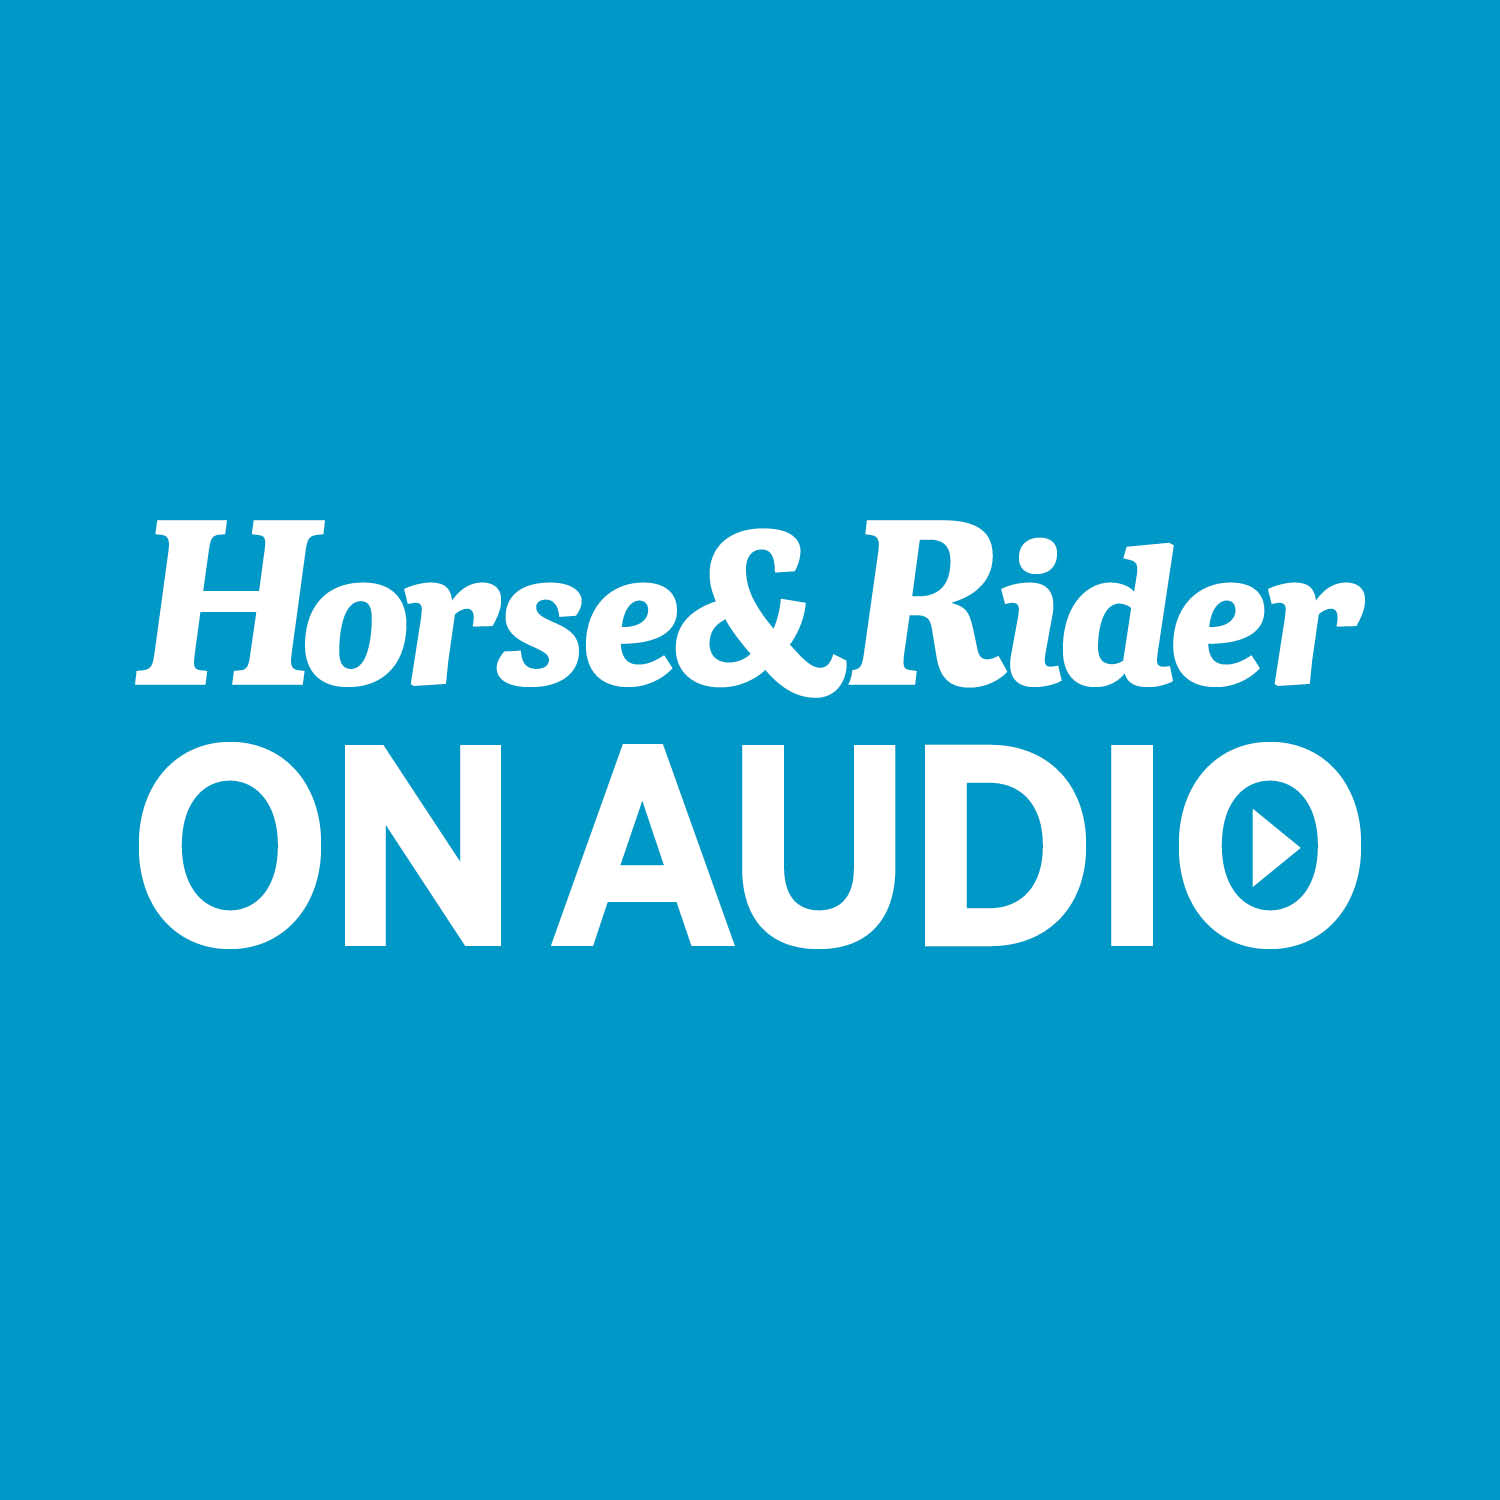 Artwork for Horse&Rider on Audio